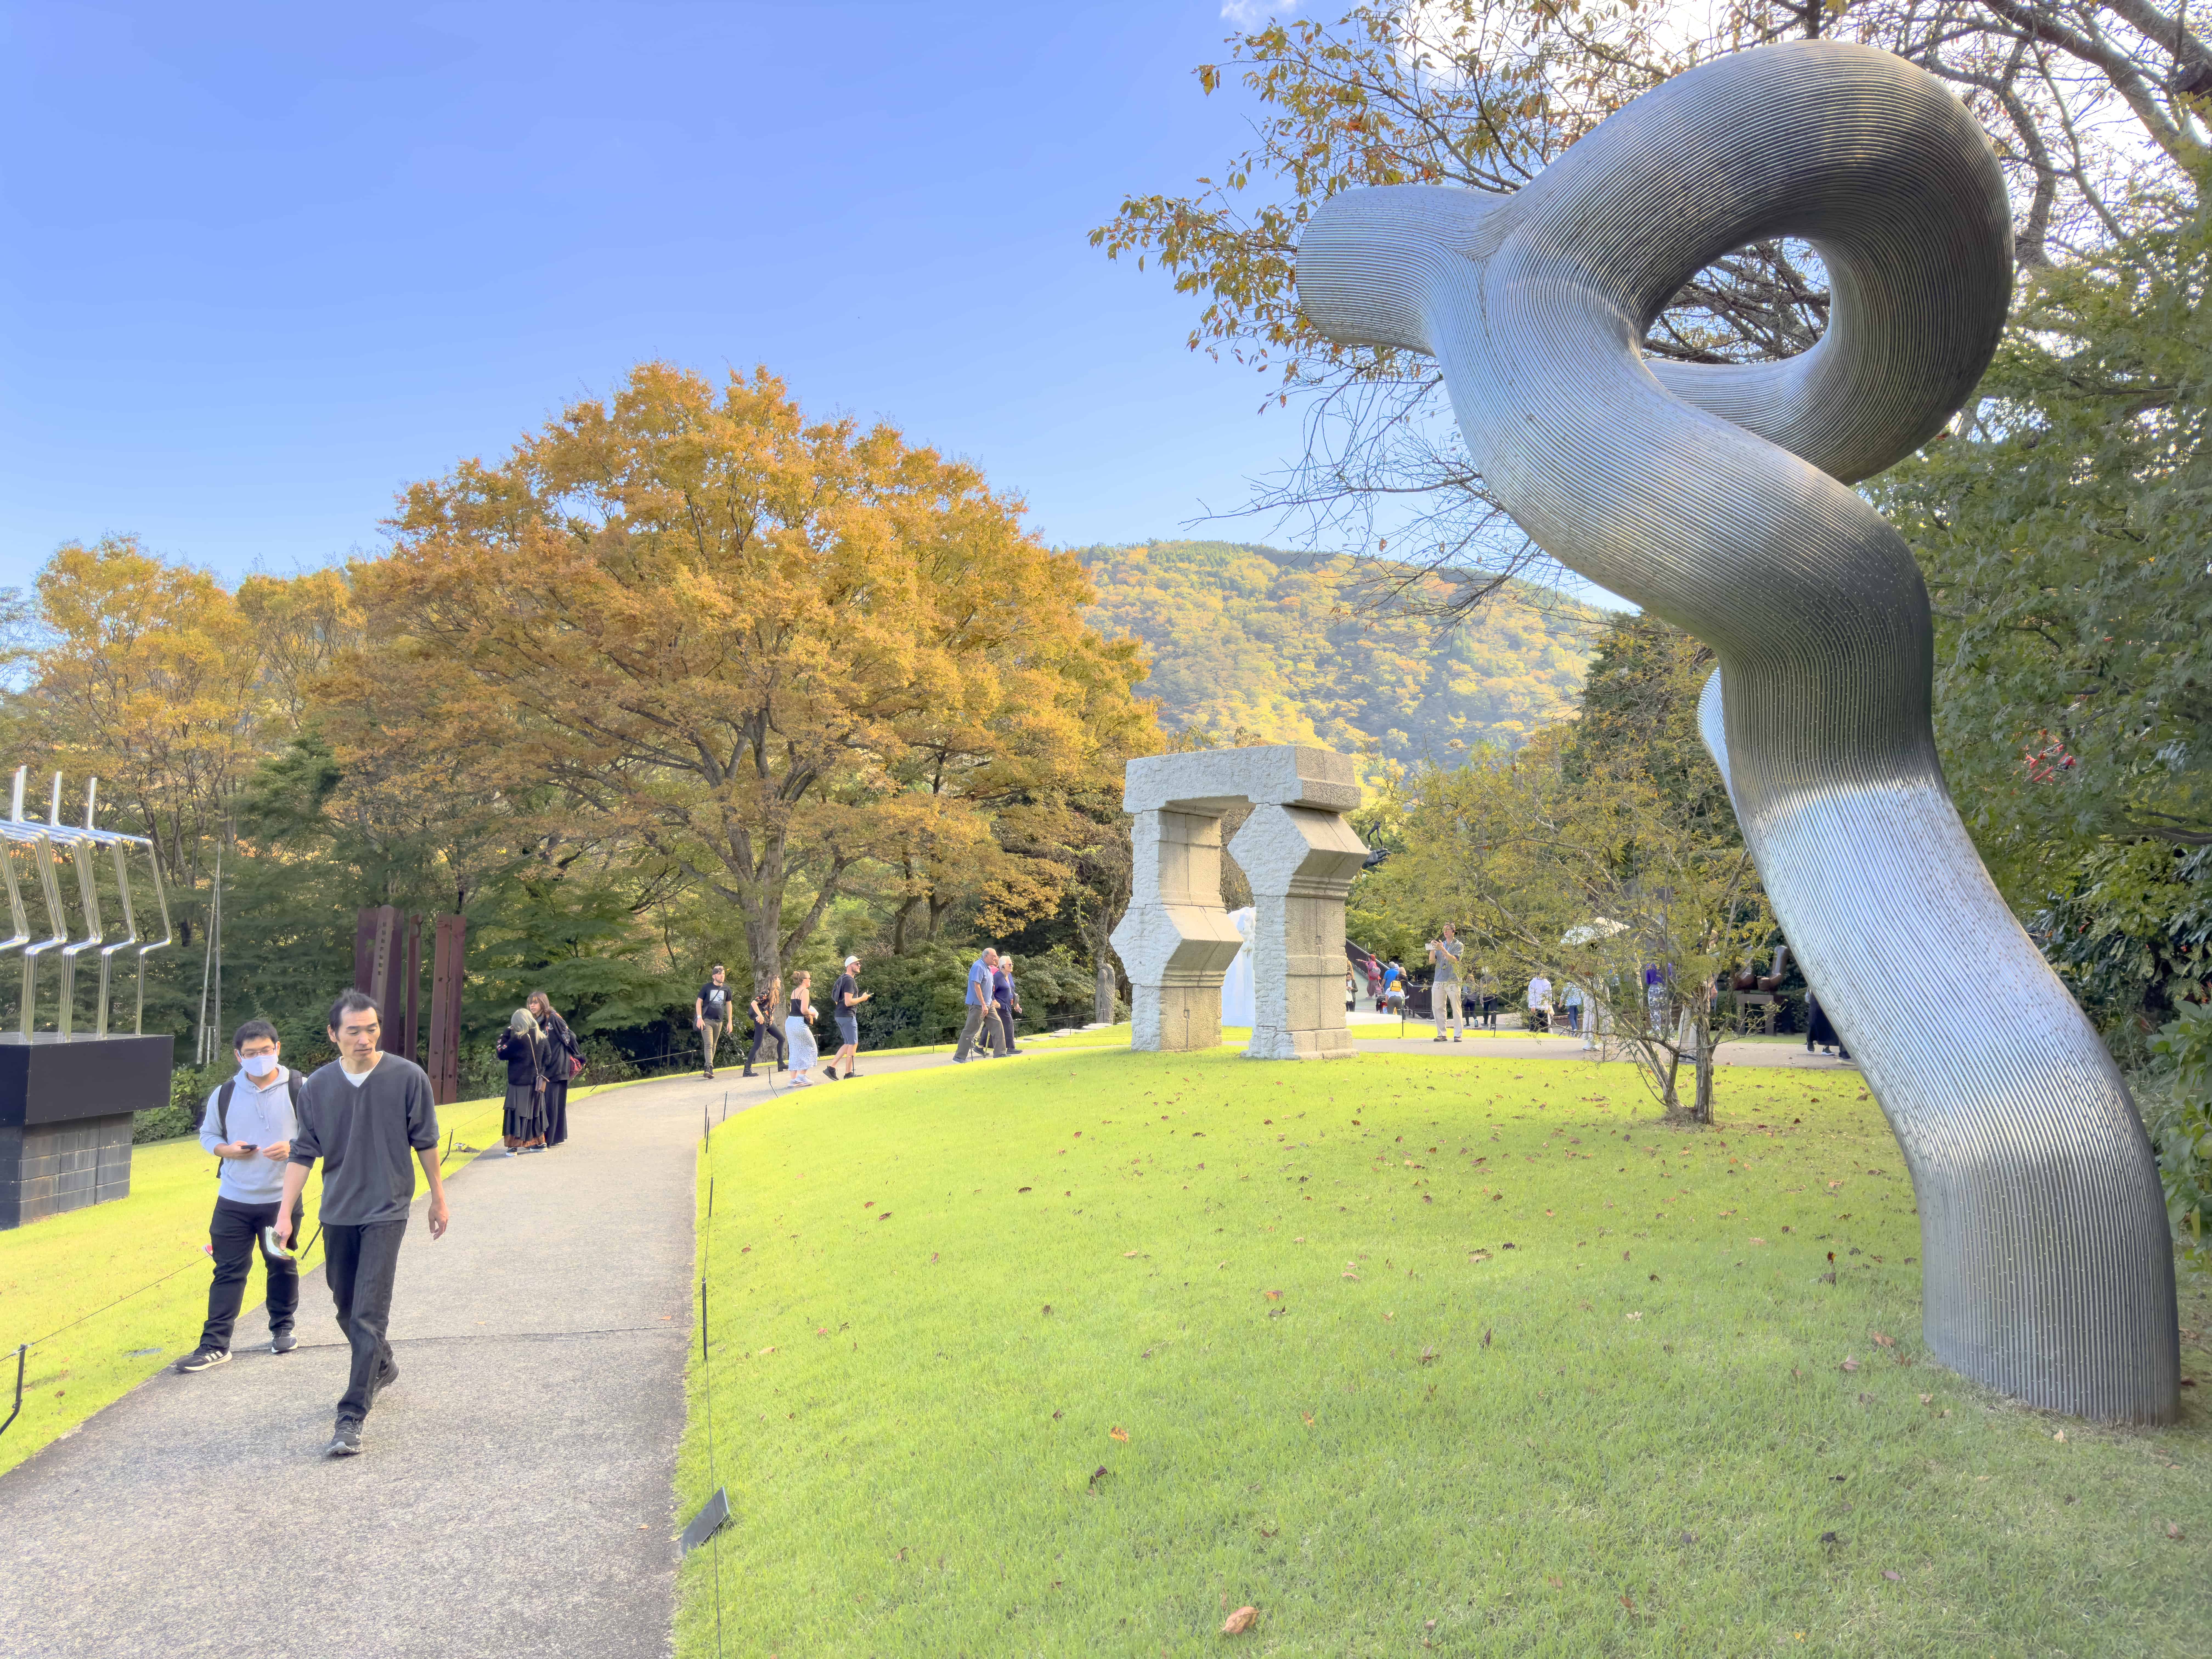 people walking through a huge outdoor sculpture garden, one of the things to do in Japan